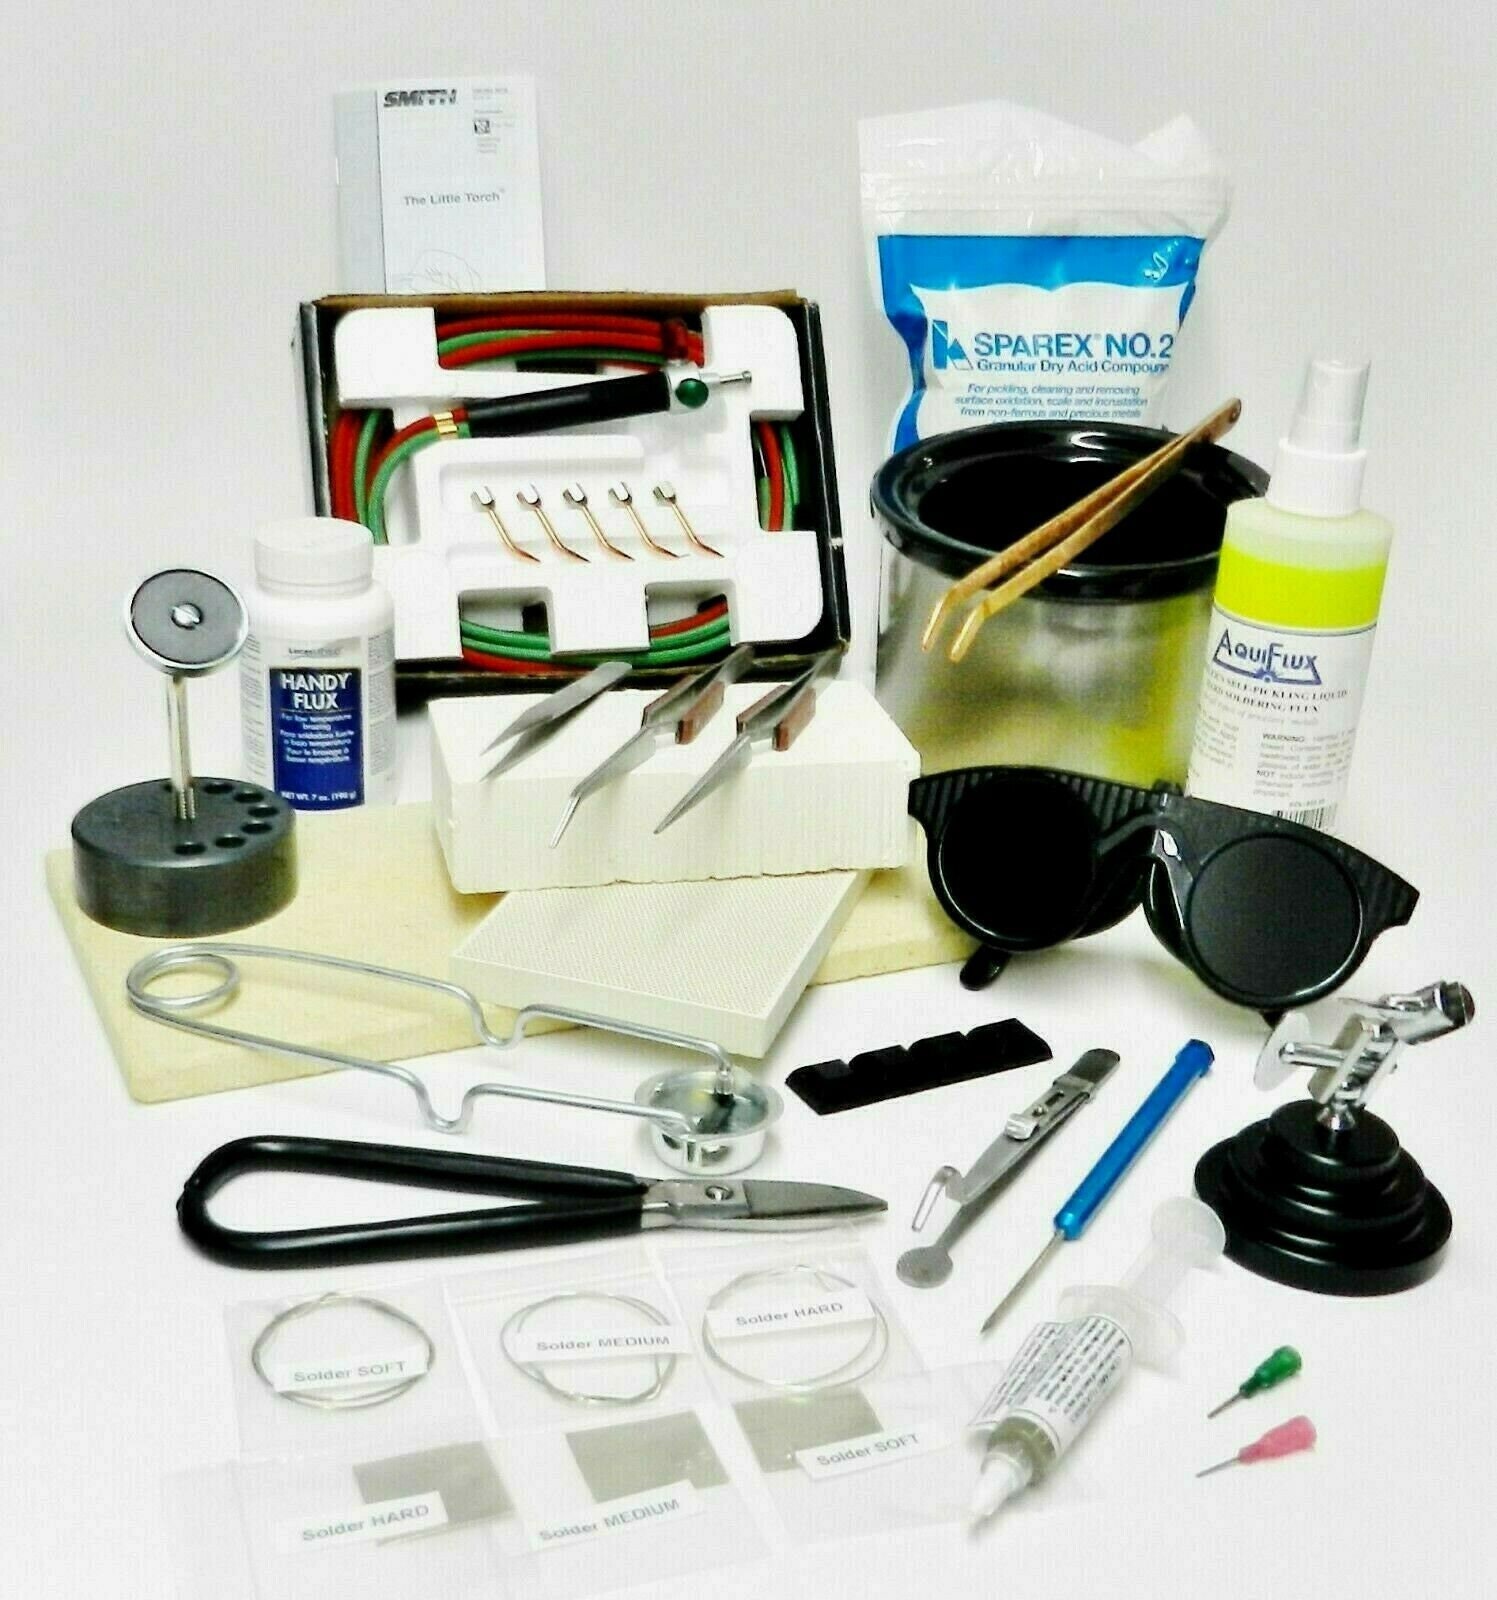 Jewelry Soldering Kit Torch Pickle Pot Tools Solder Supplies & Repair Jewelry